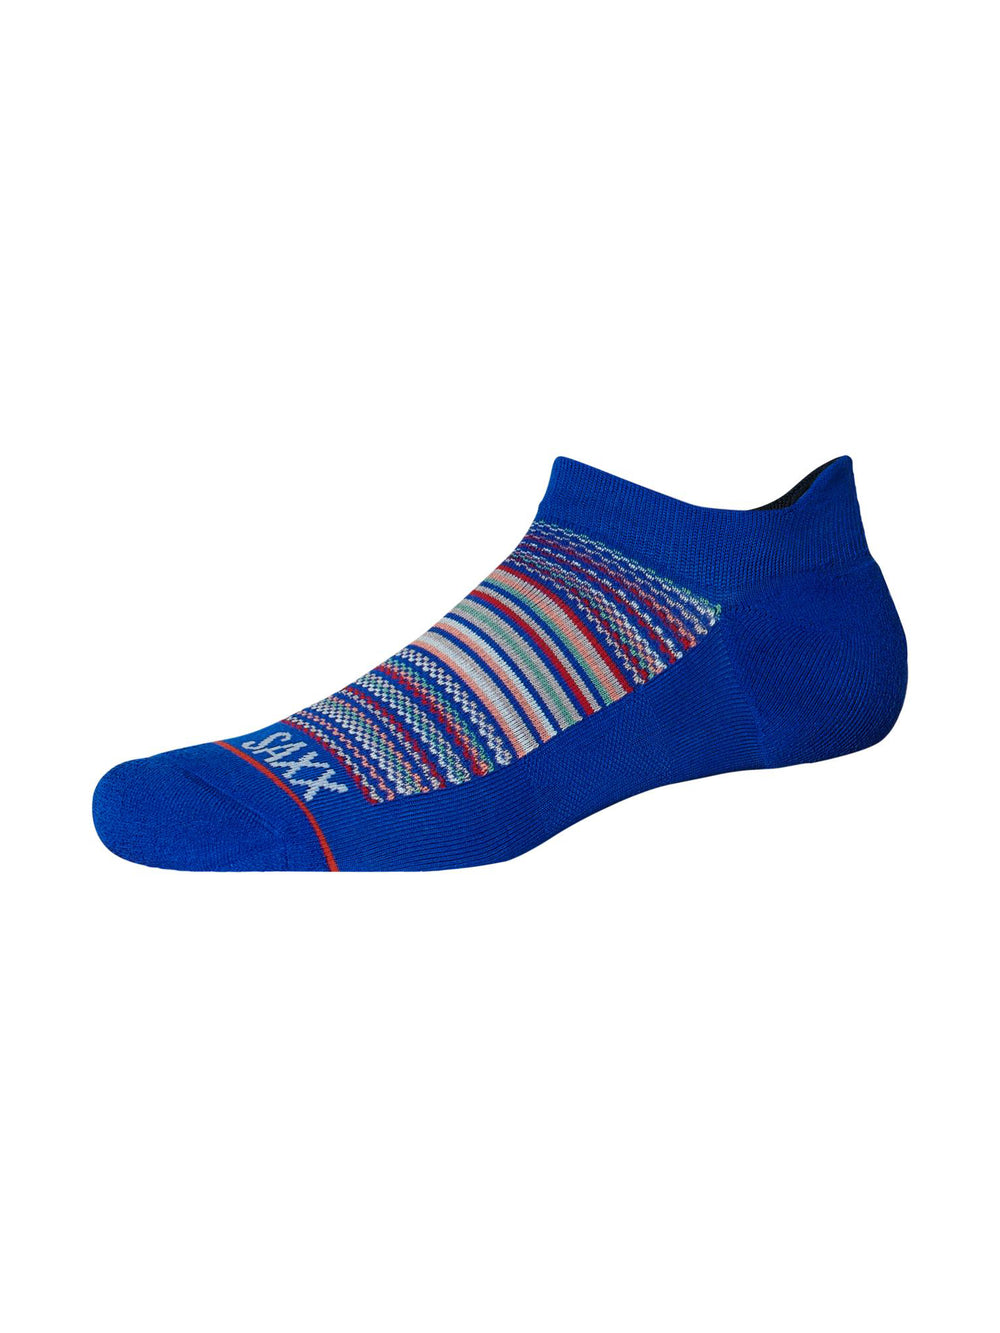 SAXX VIBRANT STRIPE LOW SHOW - CLEARANCE